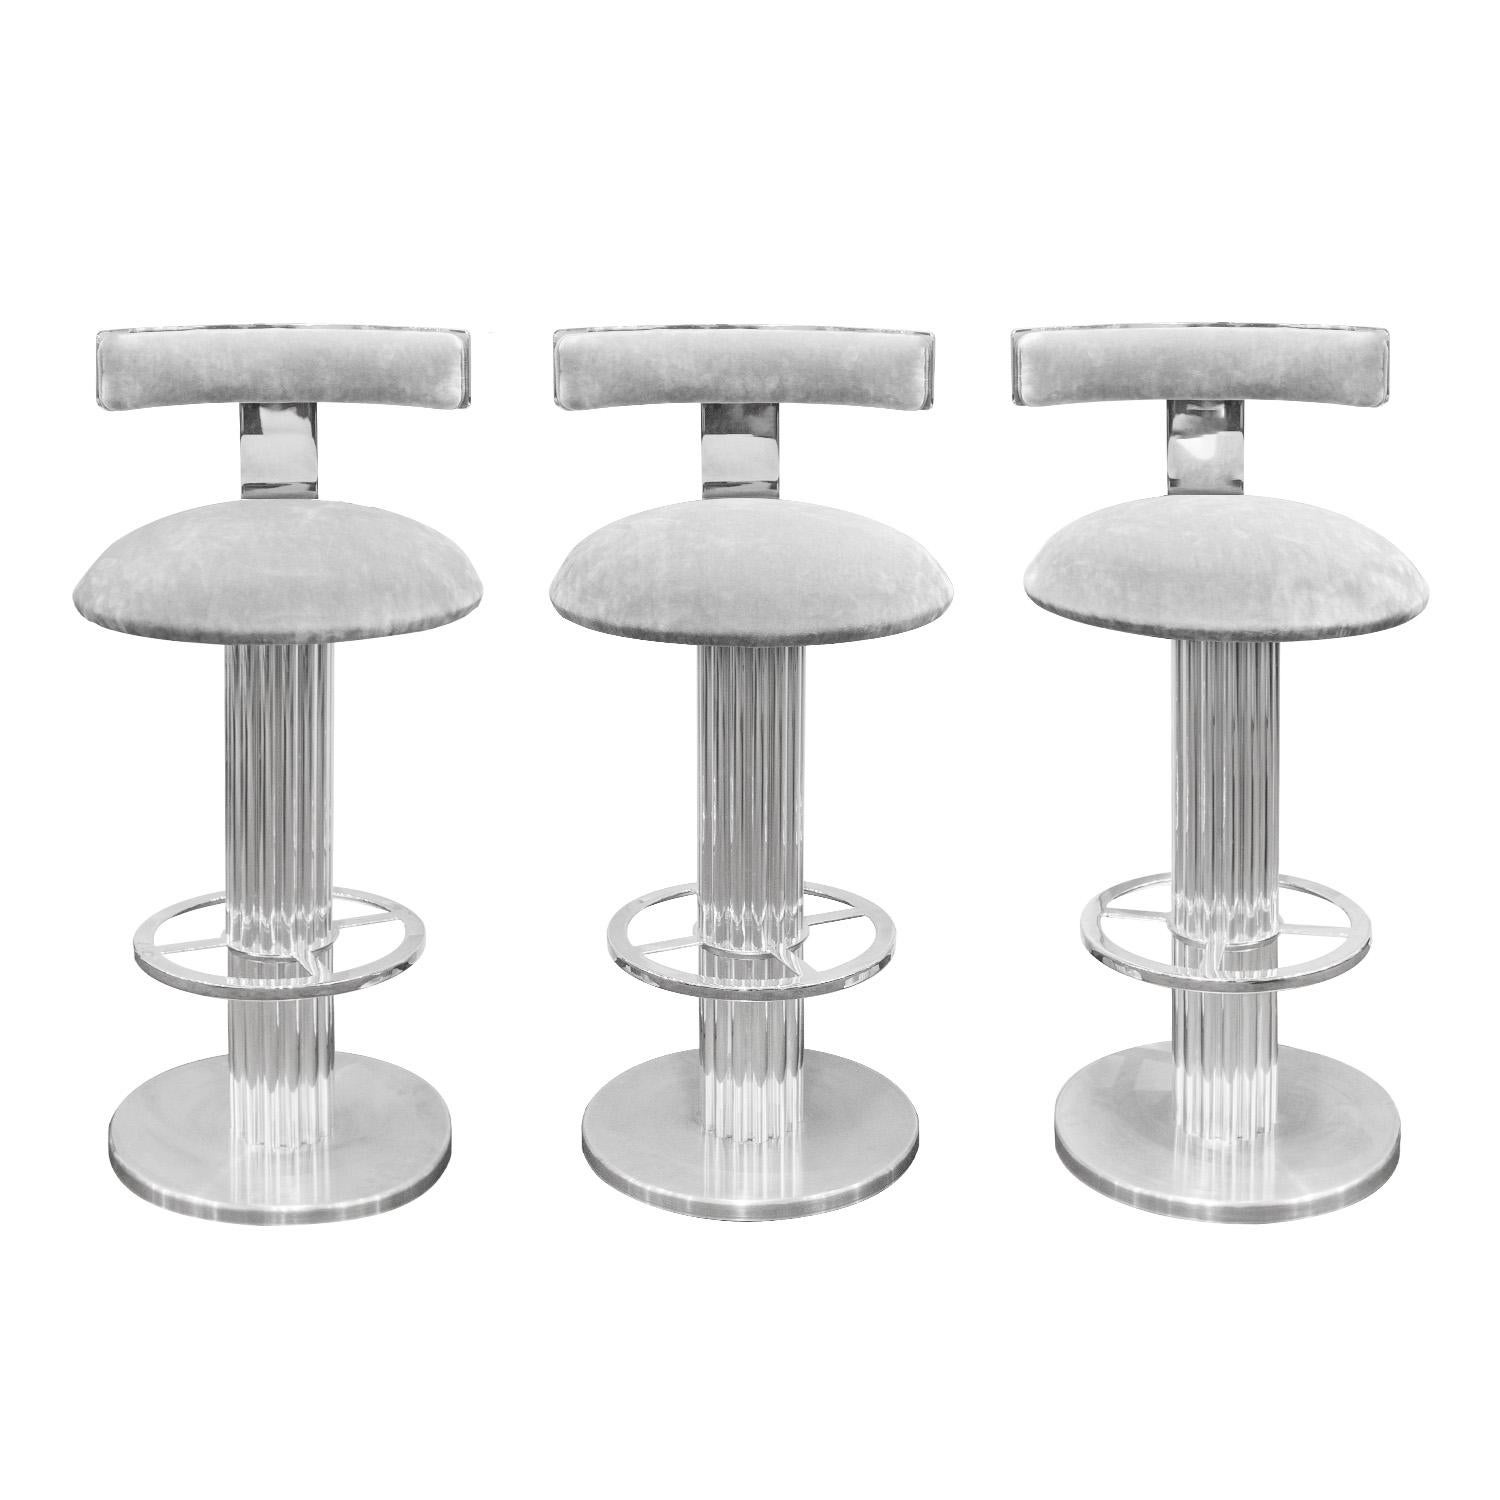 Set of 3 finely crafted bar stools in stainless steel with fluted bases and floating back rest by Design for Leisure, American 1970's. Metal has been professionally cleaned and polished. Seats have been newly reupholstered in gray velvet by Lobel